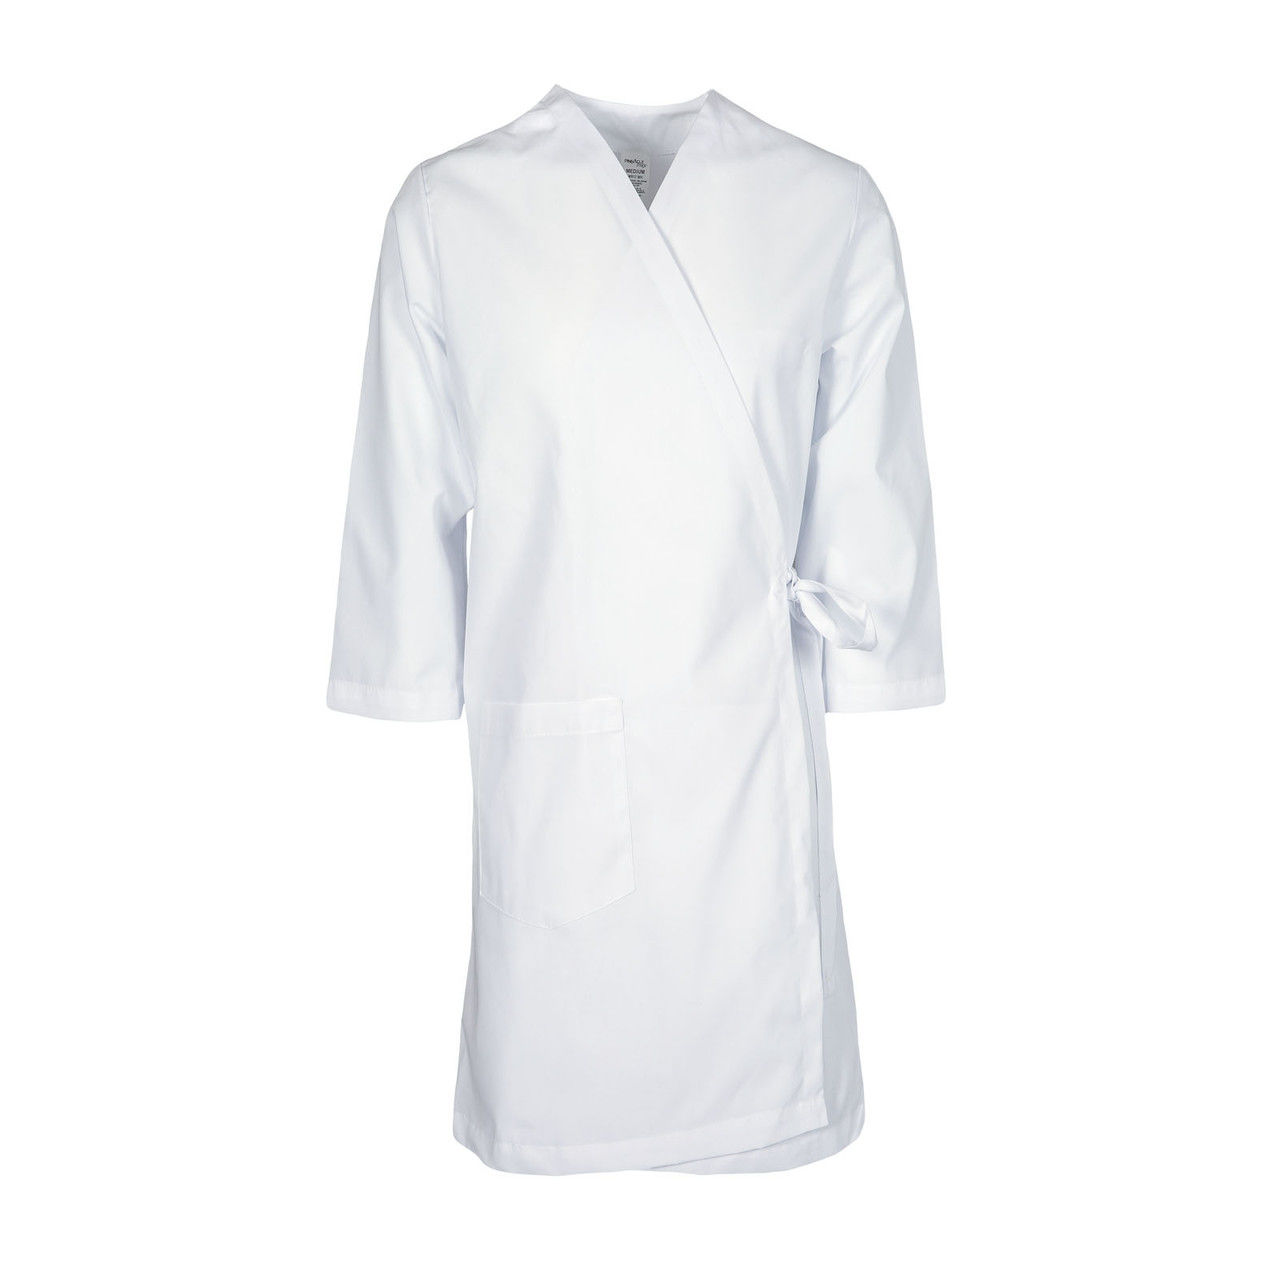 What color and sizes are available for the white, 3 pocket smock gown?